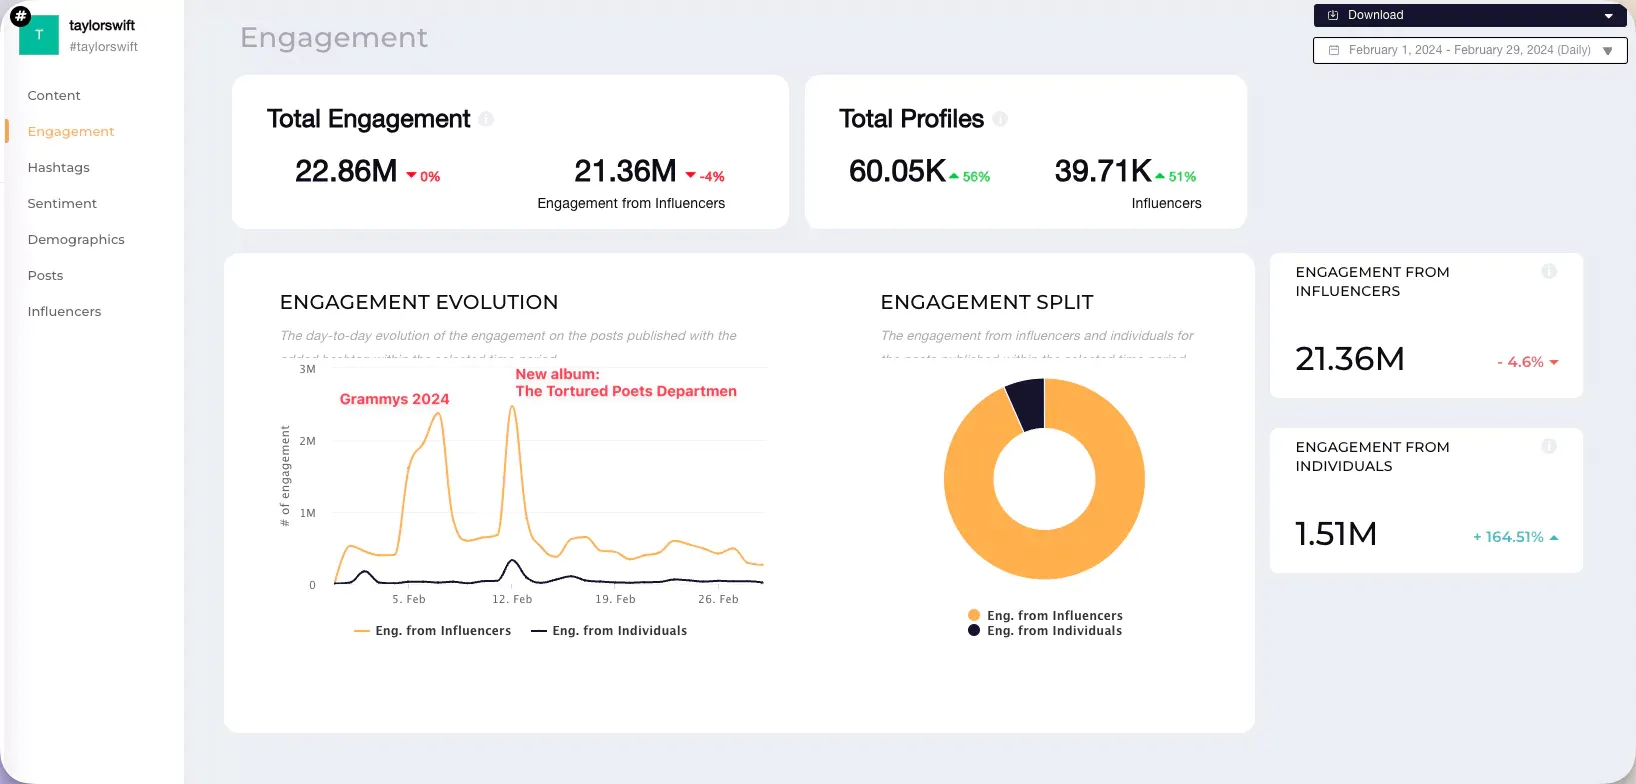 Printscreen of Sociainsider’s social listening tool showing results of #taylorswift engagement on Instagram